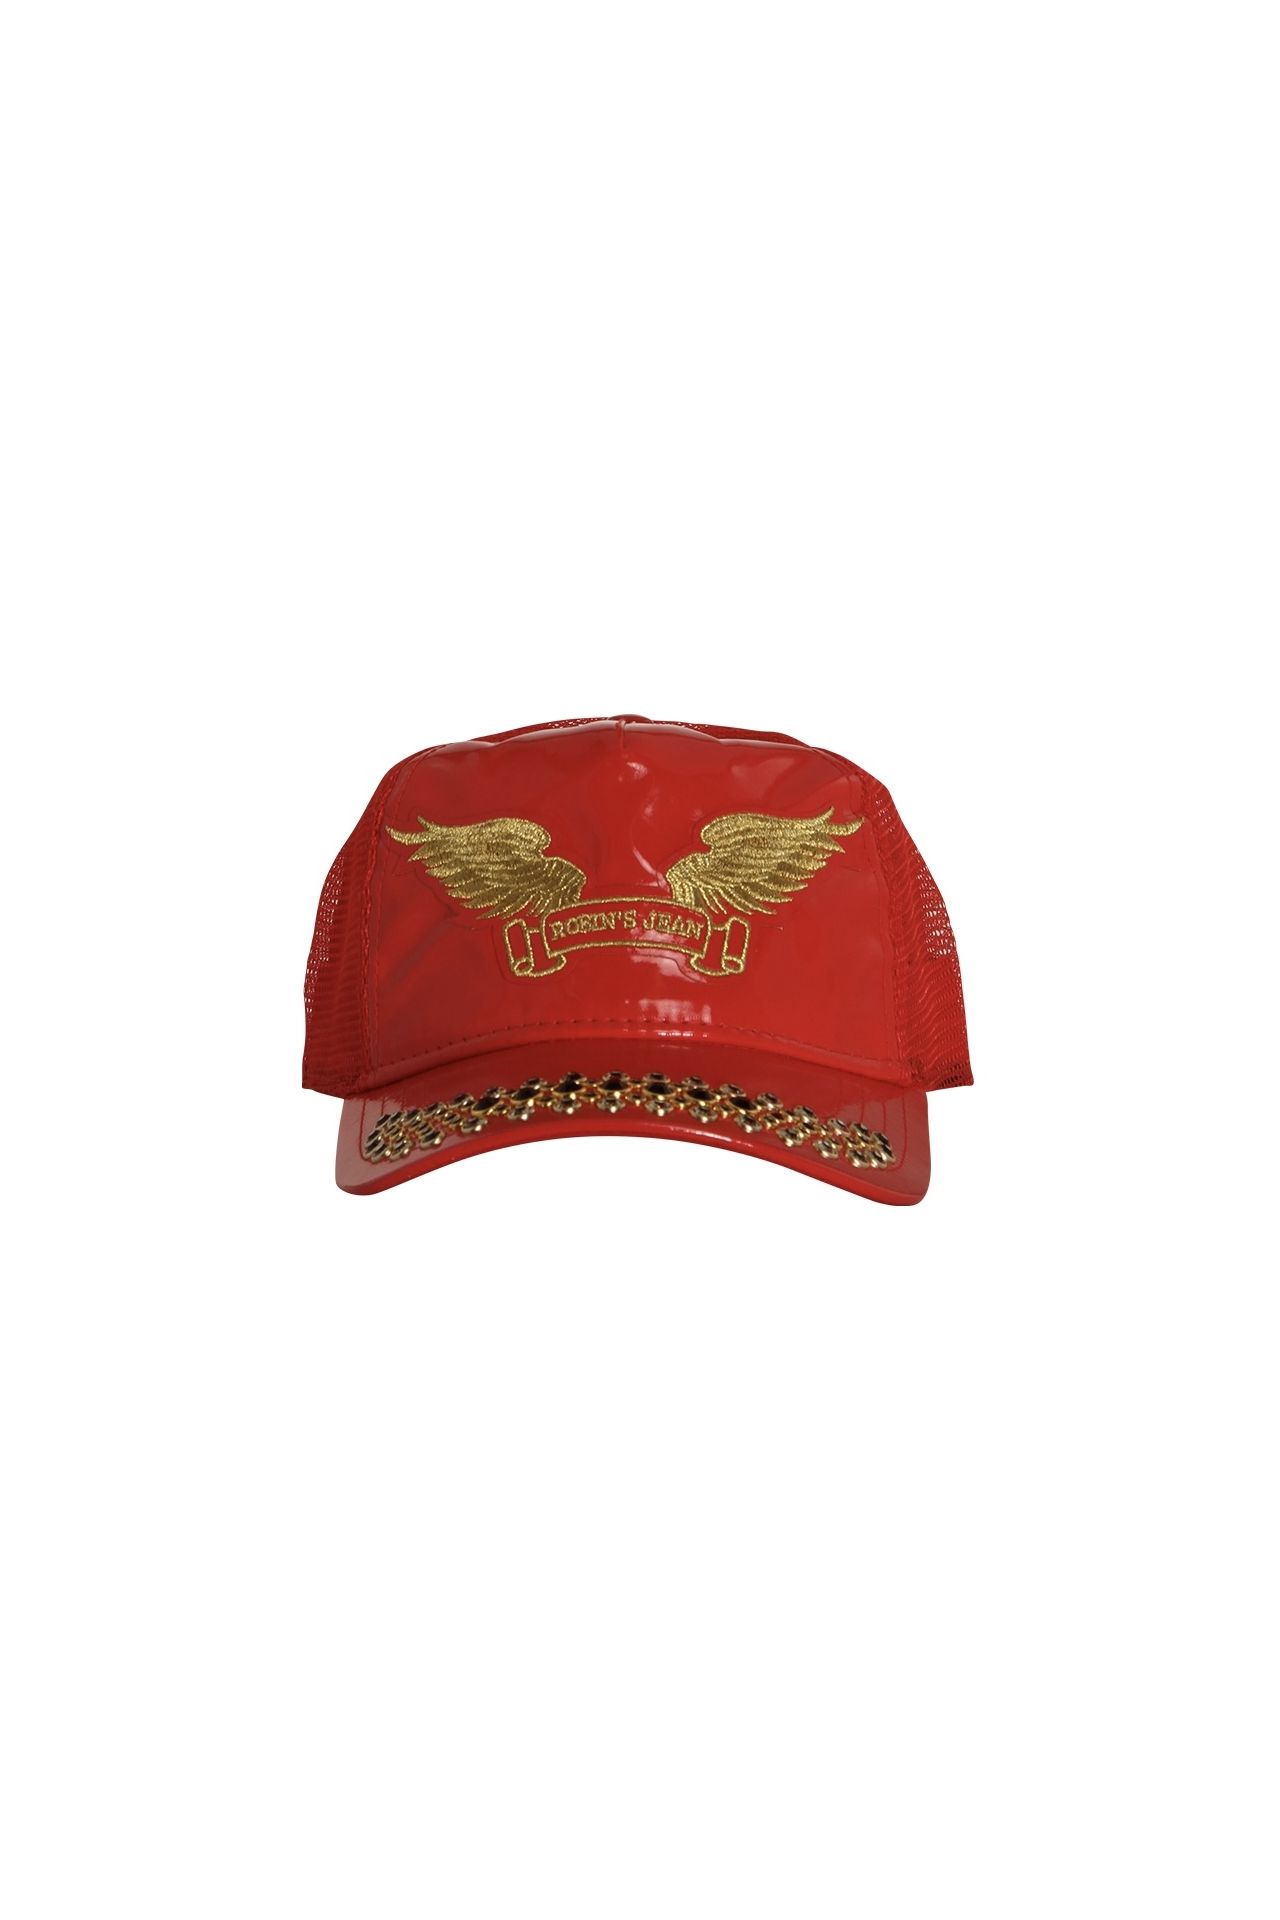 TRUCKER CAP IN PATENT RED WITH GOLD WINGS AND CRYSTALS